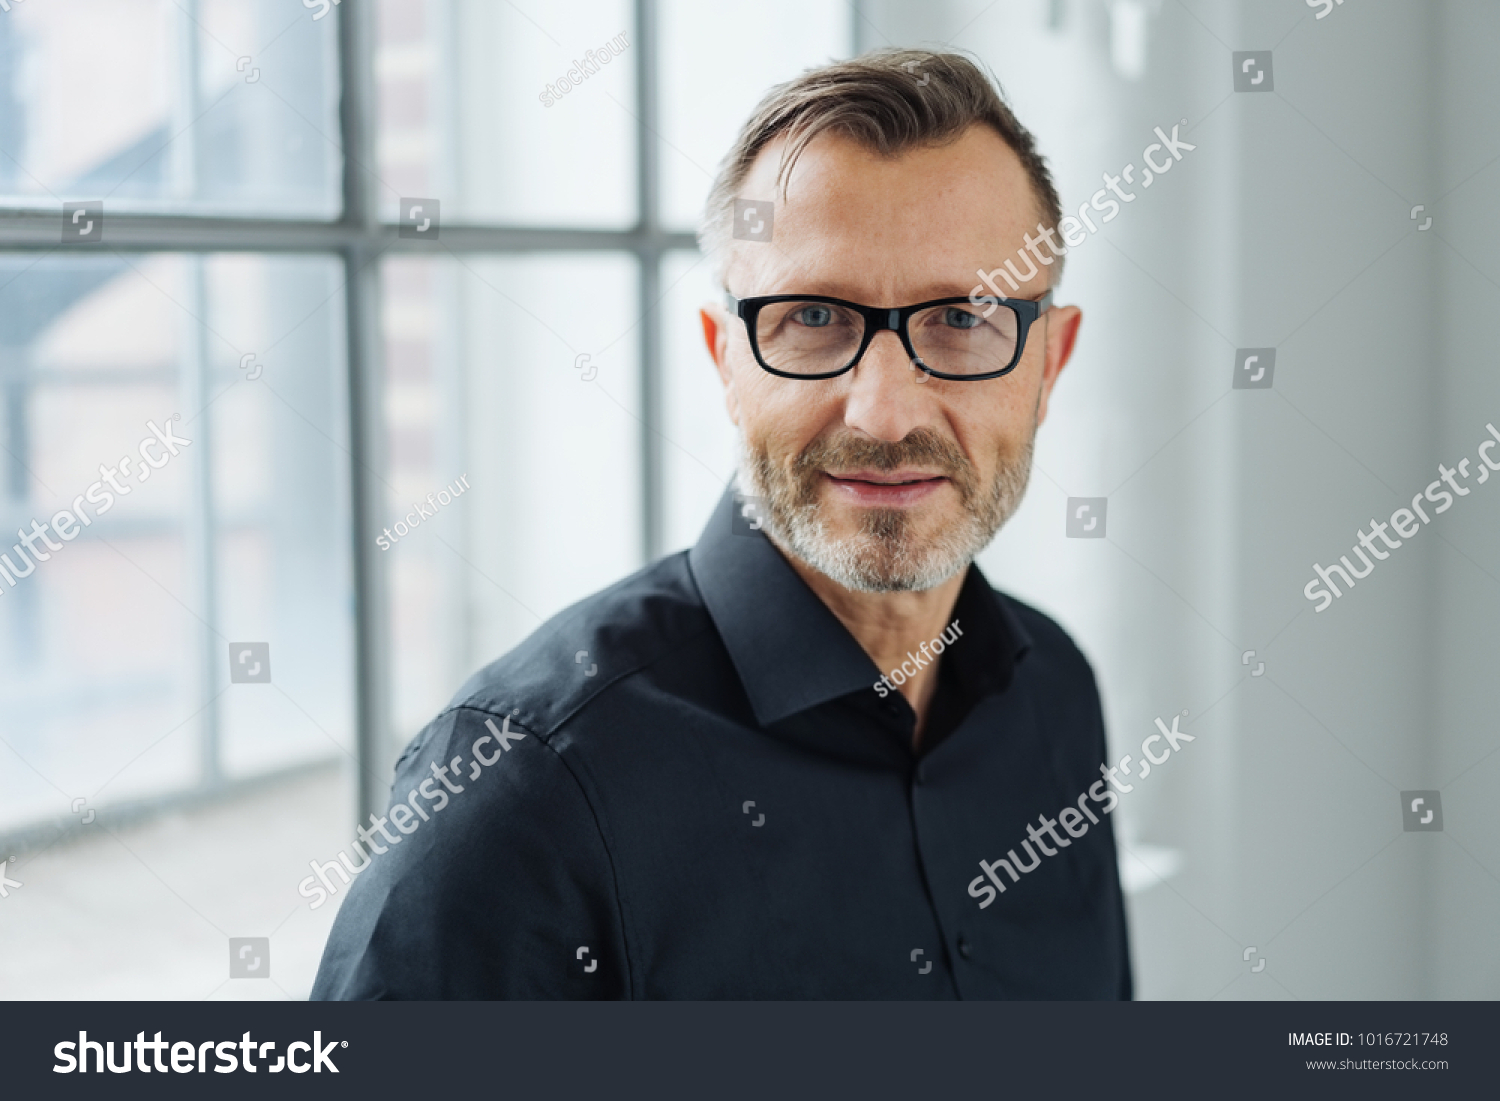 Close-up portrait of a middle-aged man wearing black shirt and eyeglasses while looking at camera with confidence in the office #1016721748